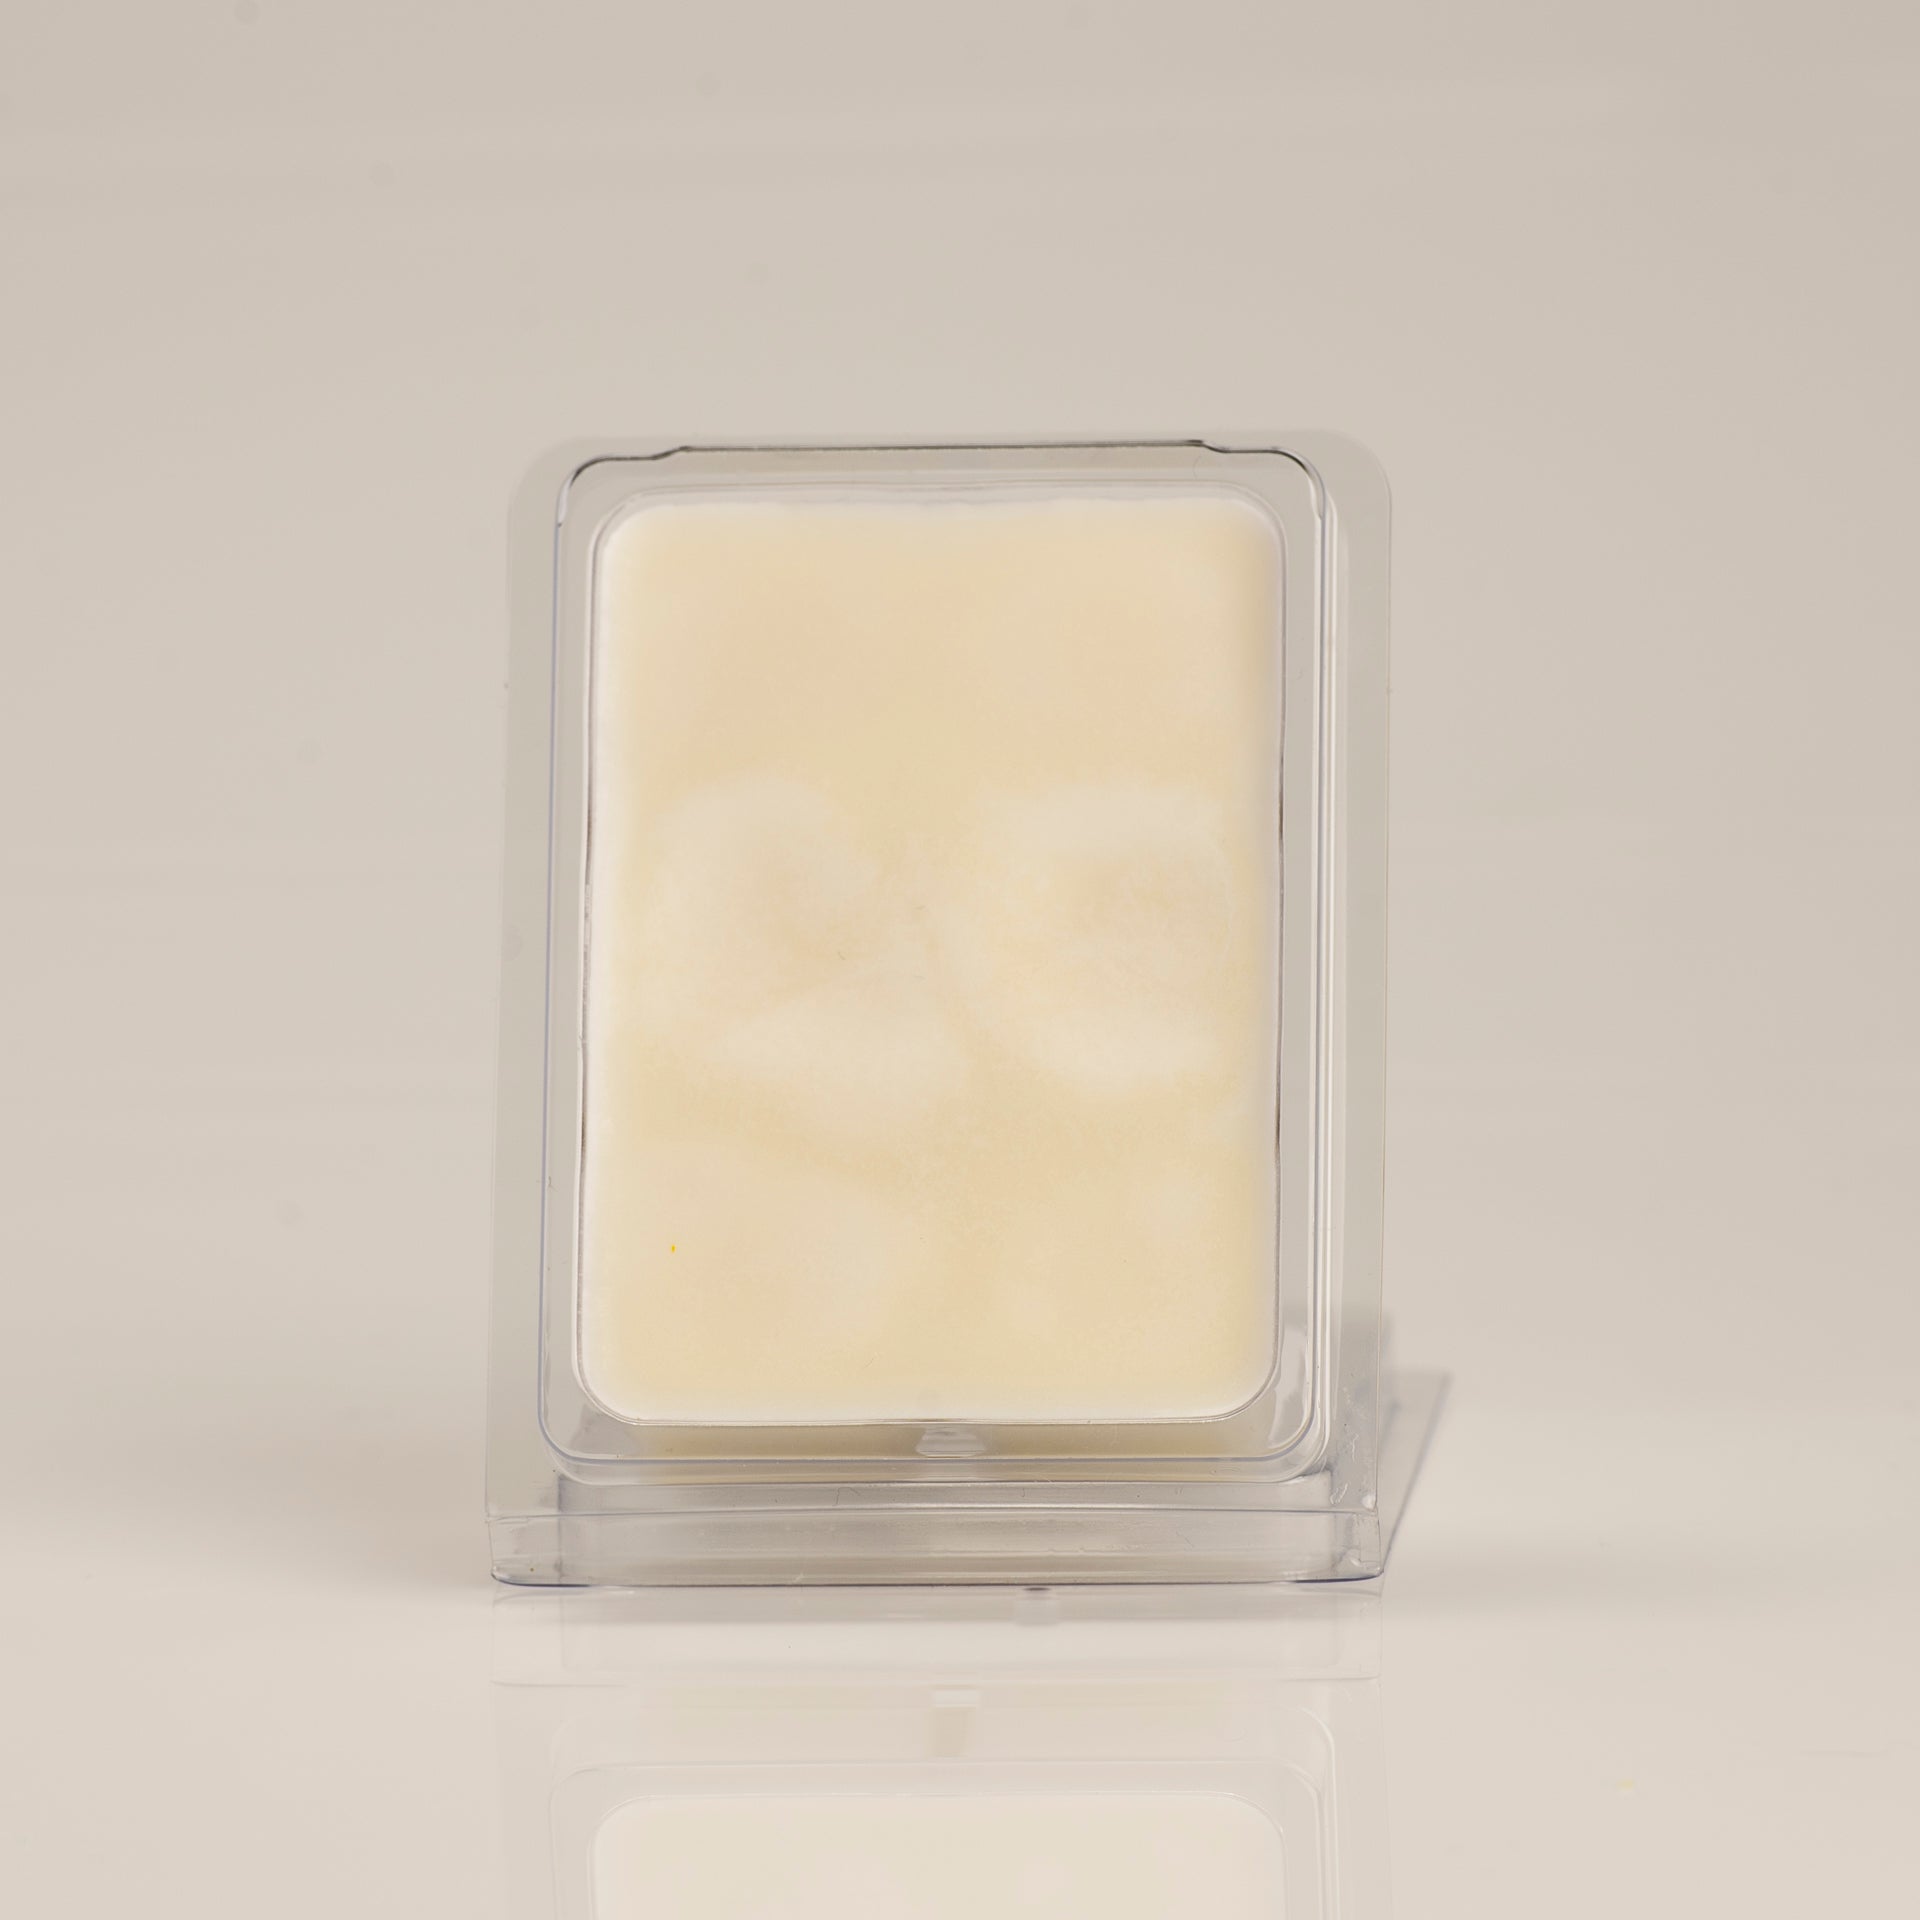 Kermode Fruity Wax Melts - 6 Amazing Scents For Wax Melter - 36 Scented Wax  Melts Wax Cubes 